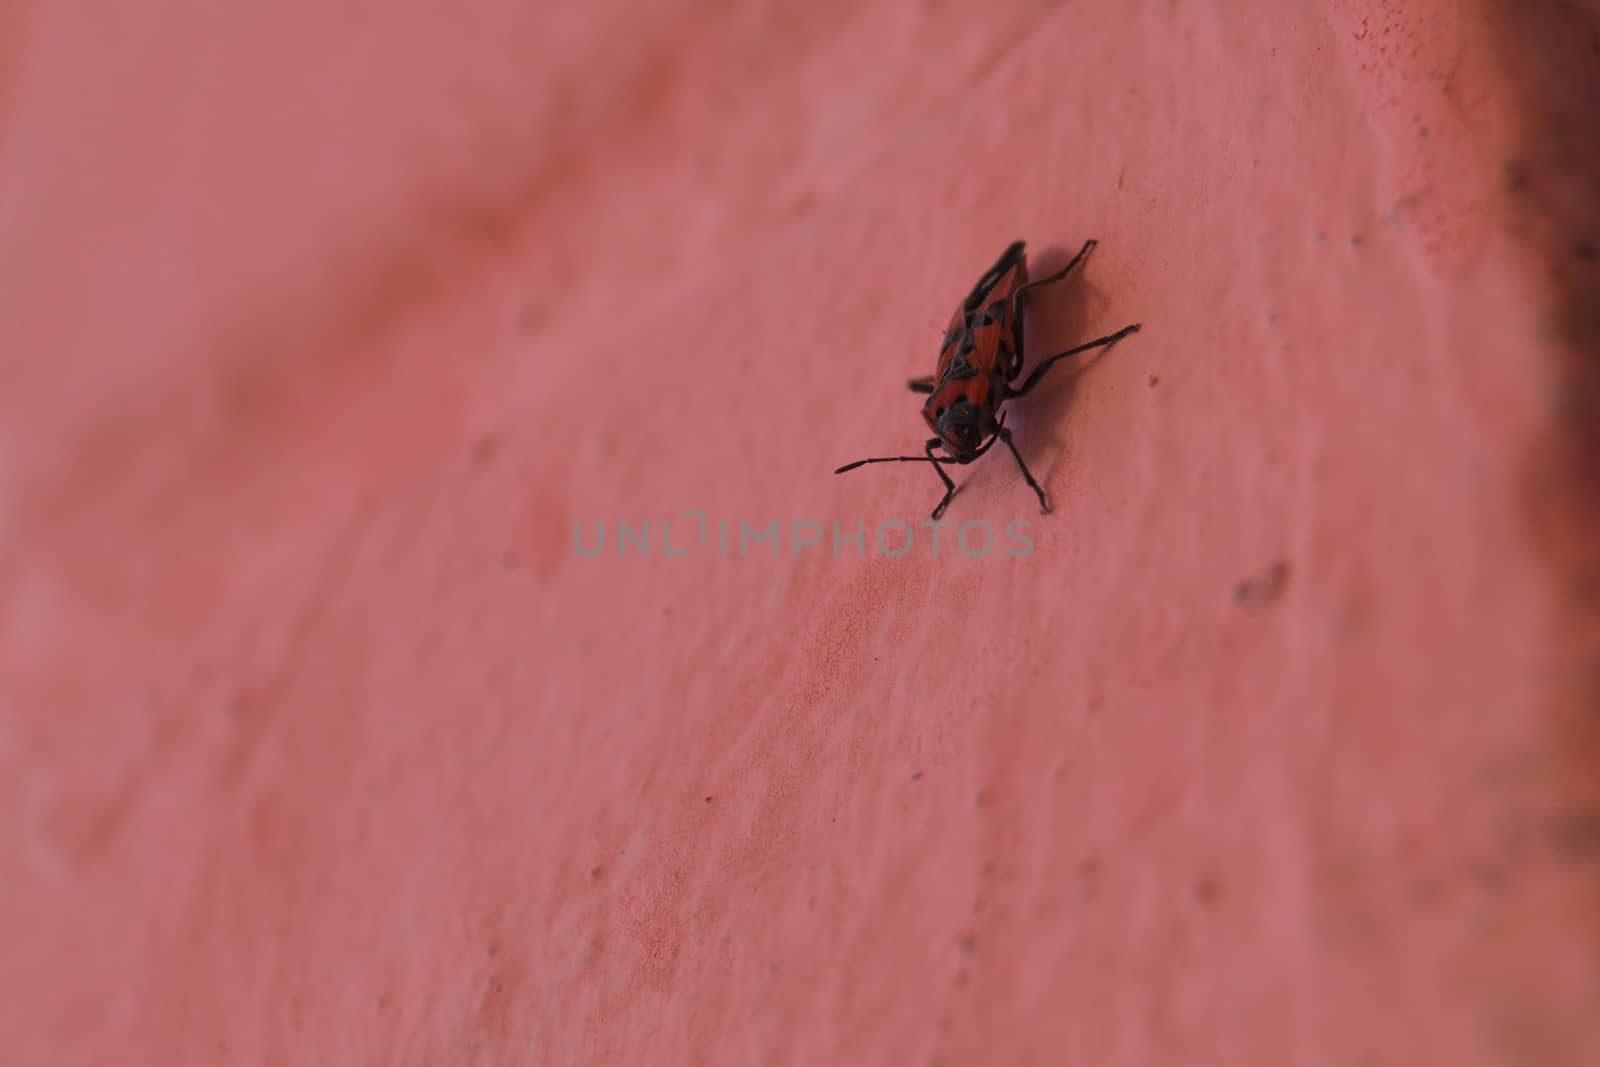 Redbug on pink wall closeup with blurred background. by alexsdriver